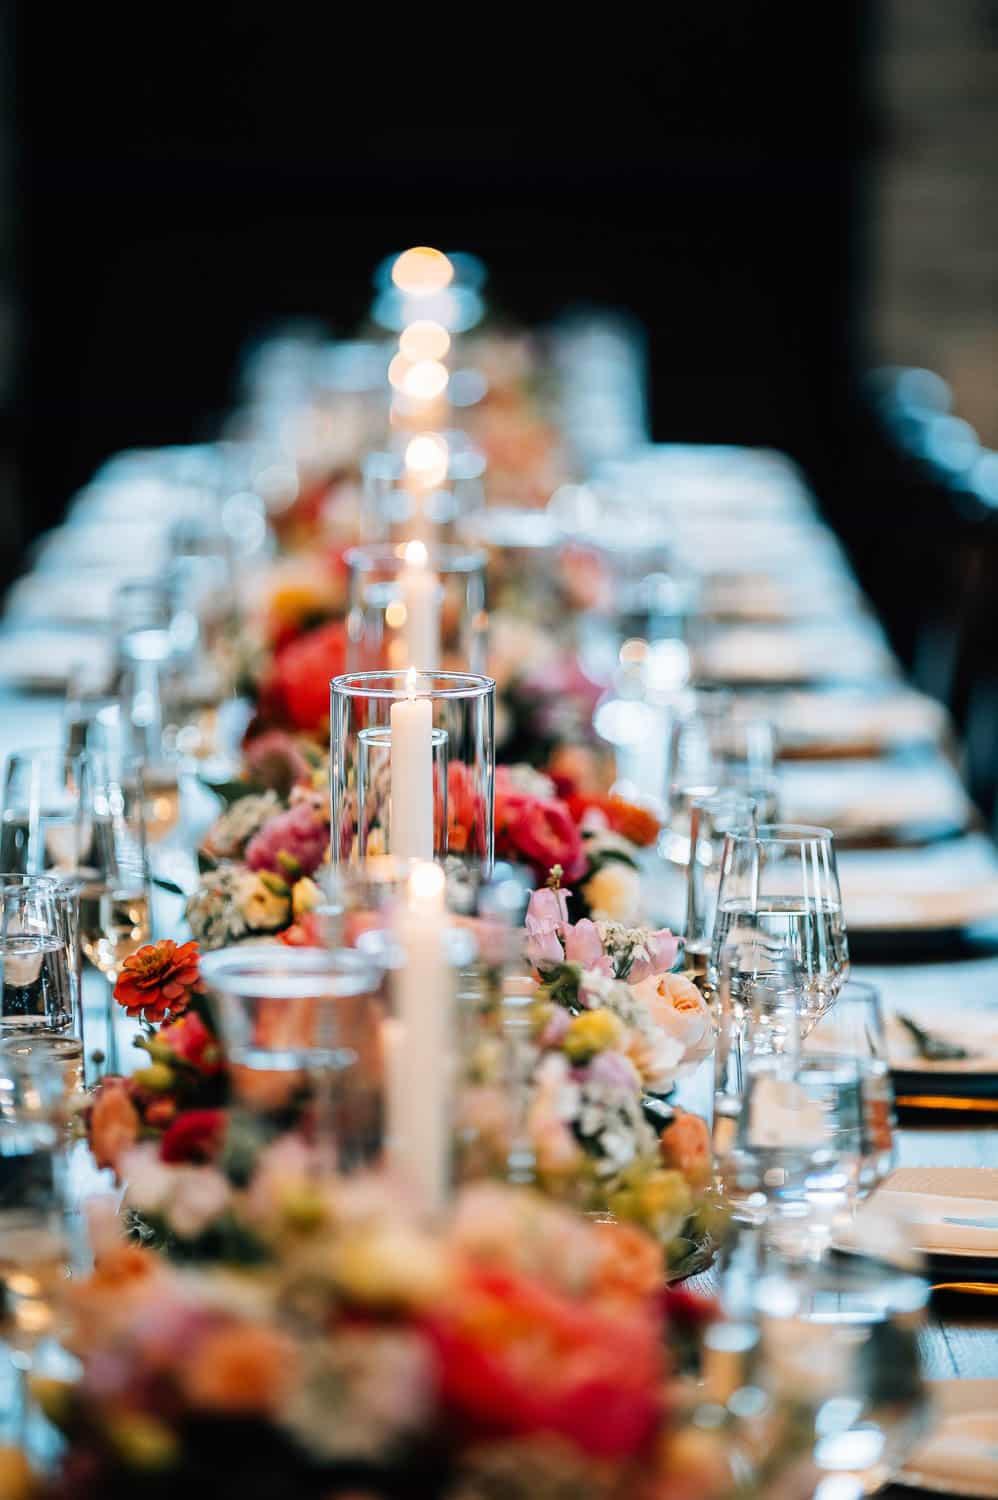 A long table with flowers and candles at a wedding reception.